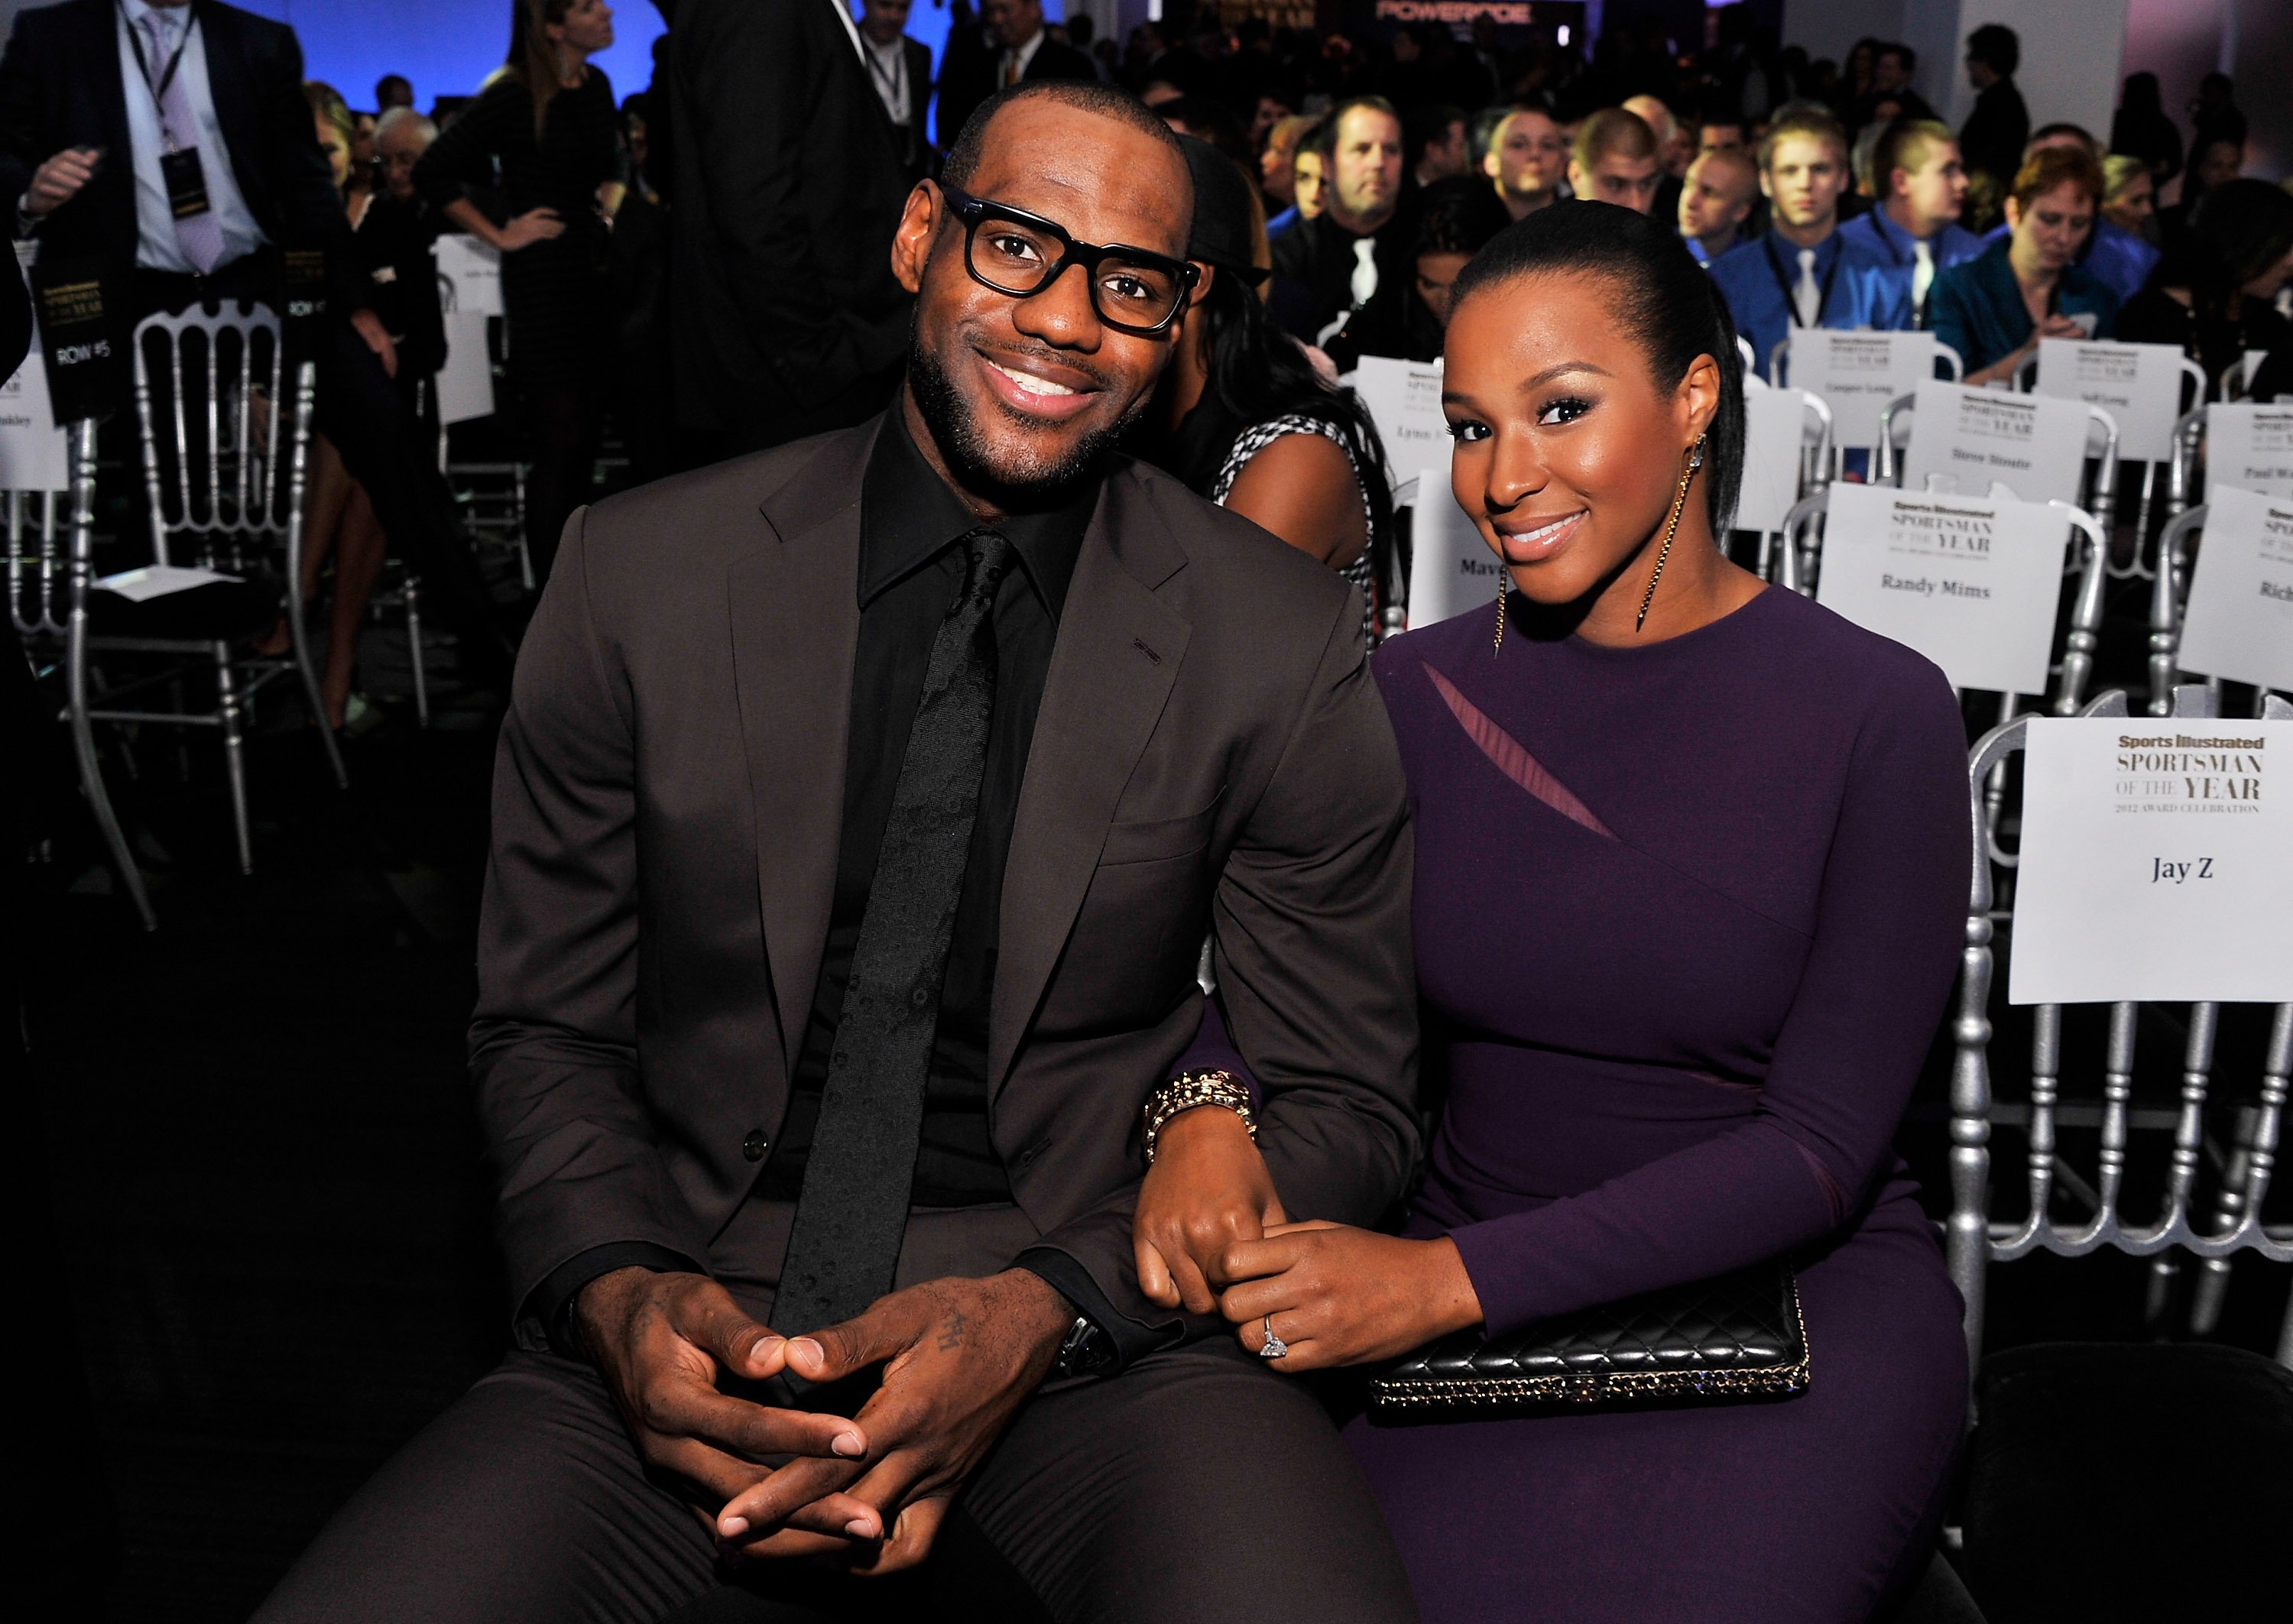 LeBron James and Savannah James at the 2012 Sports Illustrated Sportsman of the Year award presentation on December 5, 2012 l Source: Getty Images  